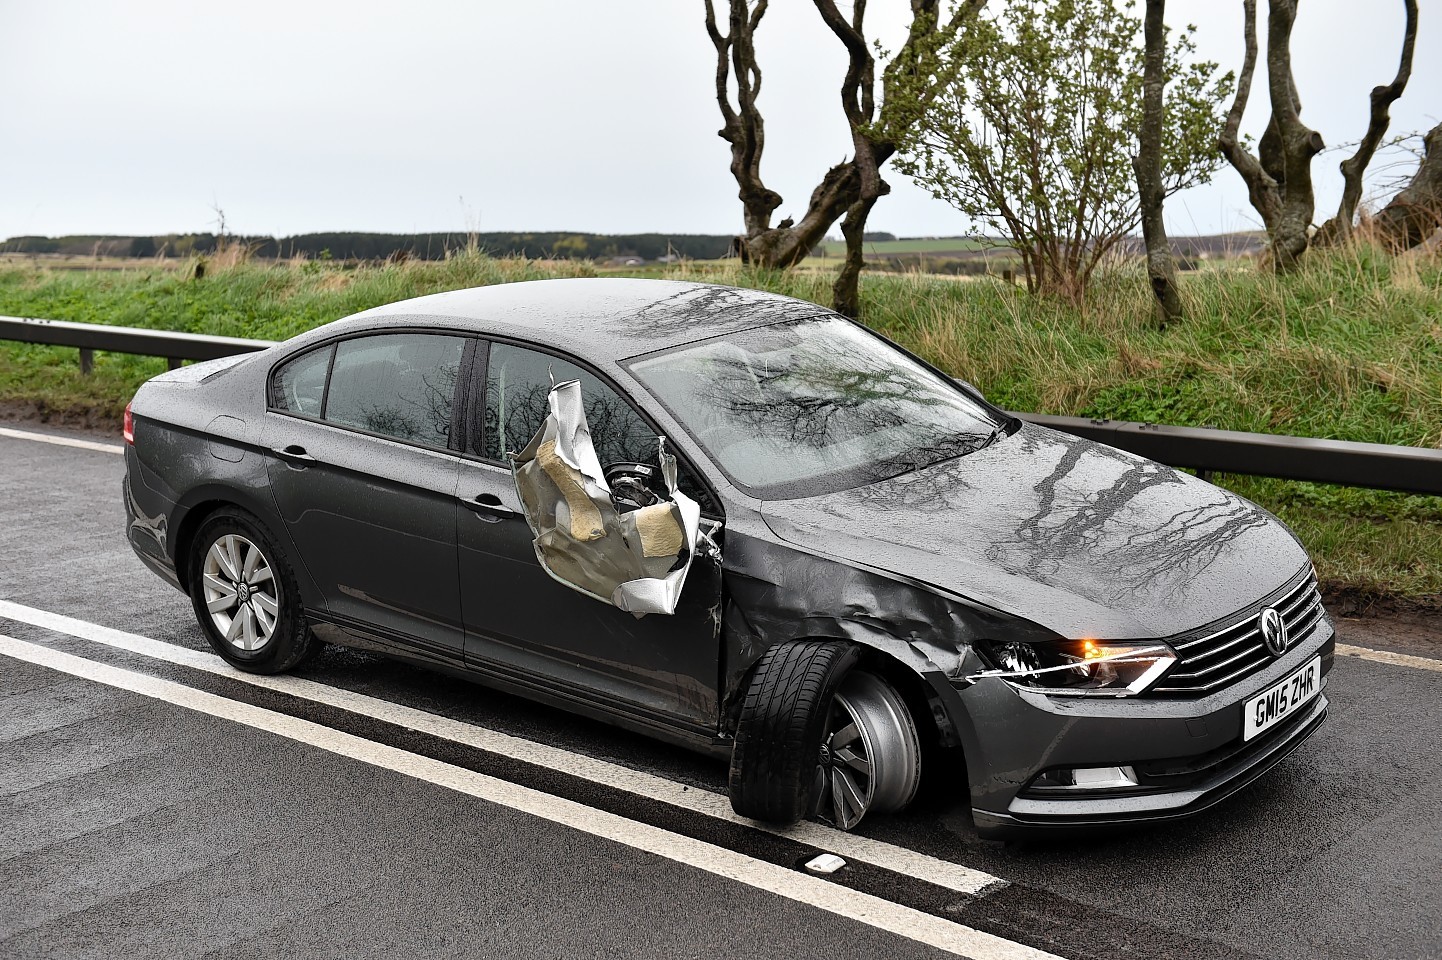 One of the cars after the multi-car crash on the A90